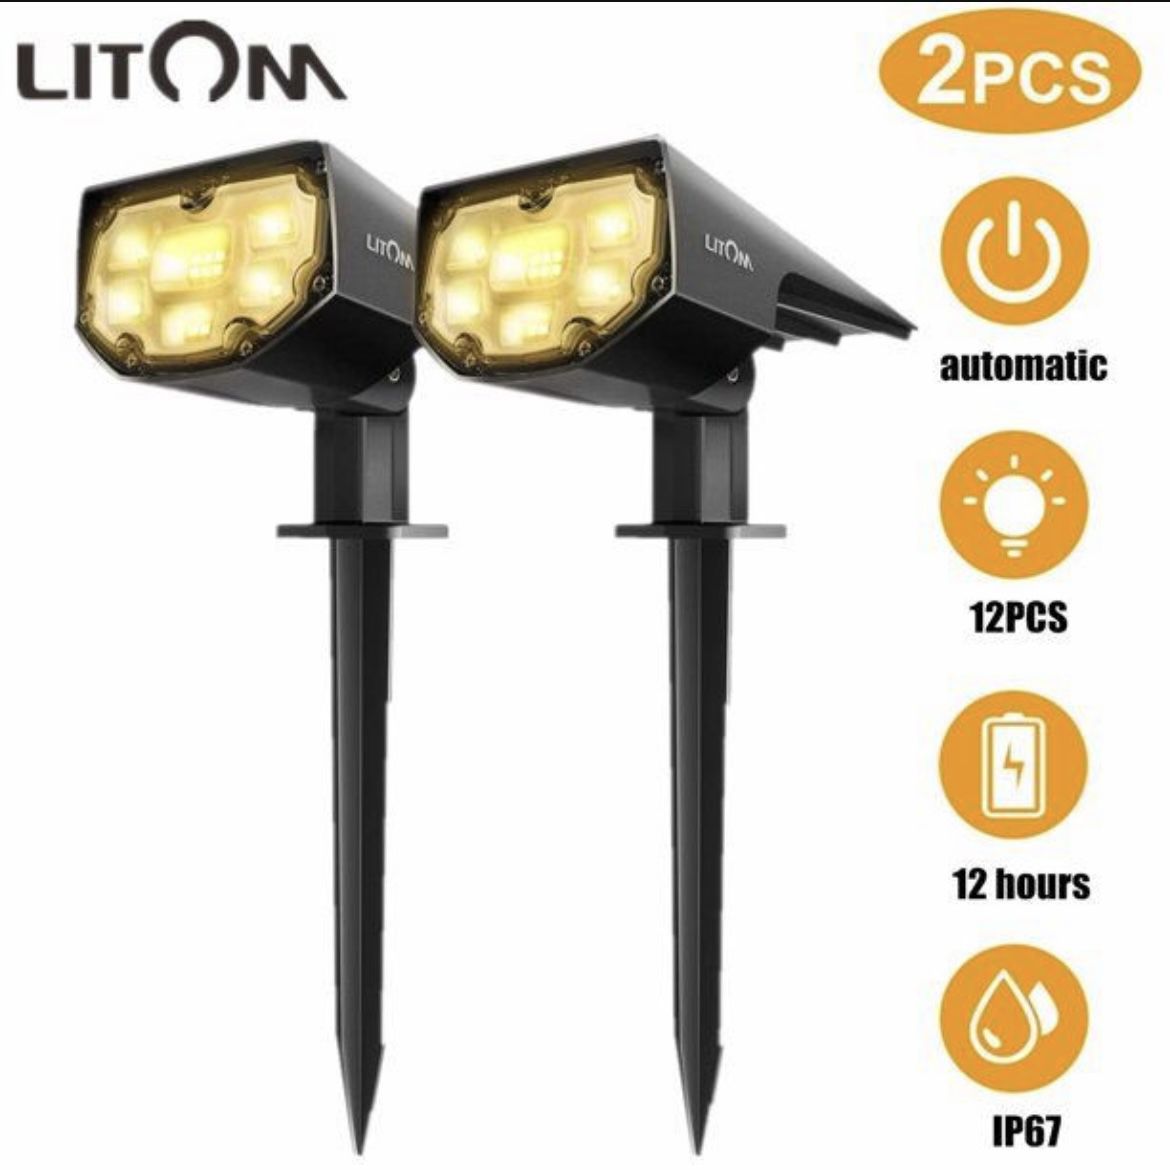 2 Pack12 LEDs Solar Landscape Spotlights IP67 Waterproof Solar Powered Wall Lights for Yard Garden Driveway Porch Walkway Pool Patio-Warm White